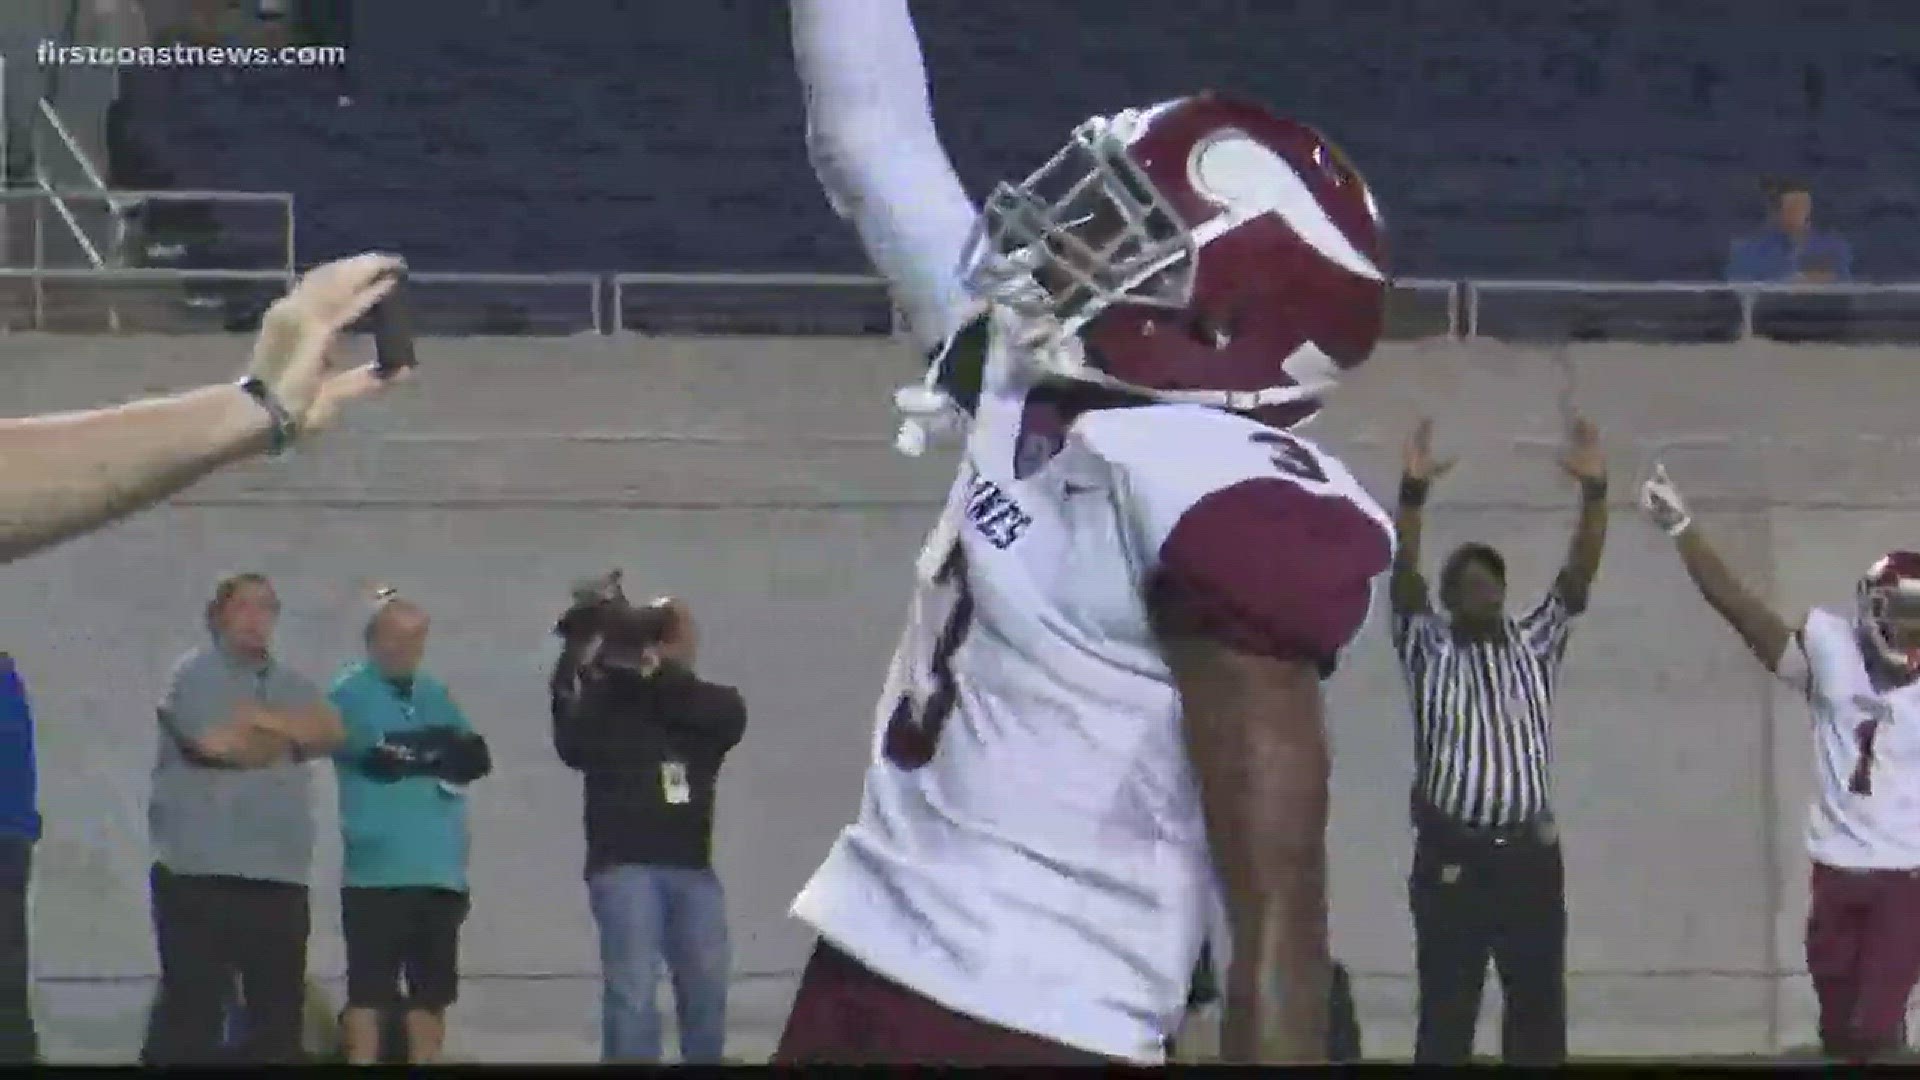 The Raines Vikings won the first state title for Duval public schools in 20 years. They last won it in 1997.